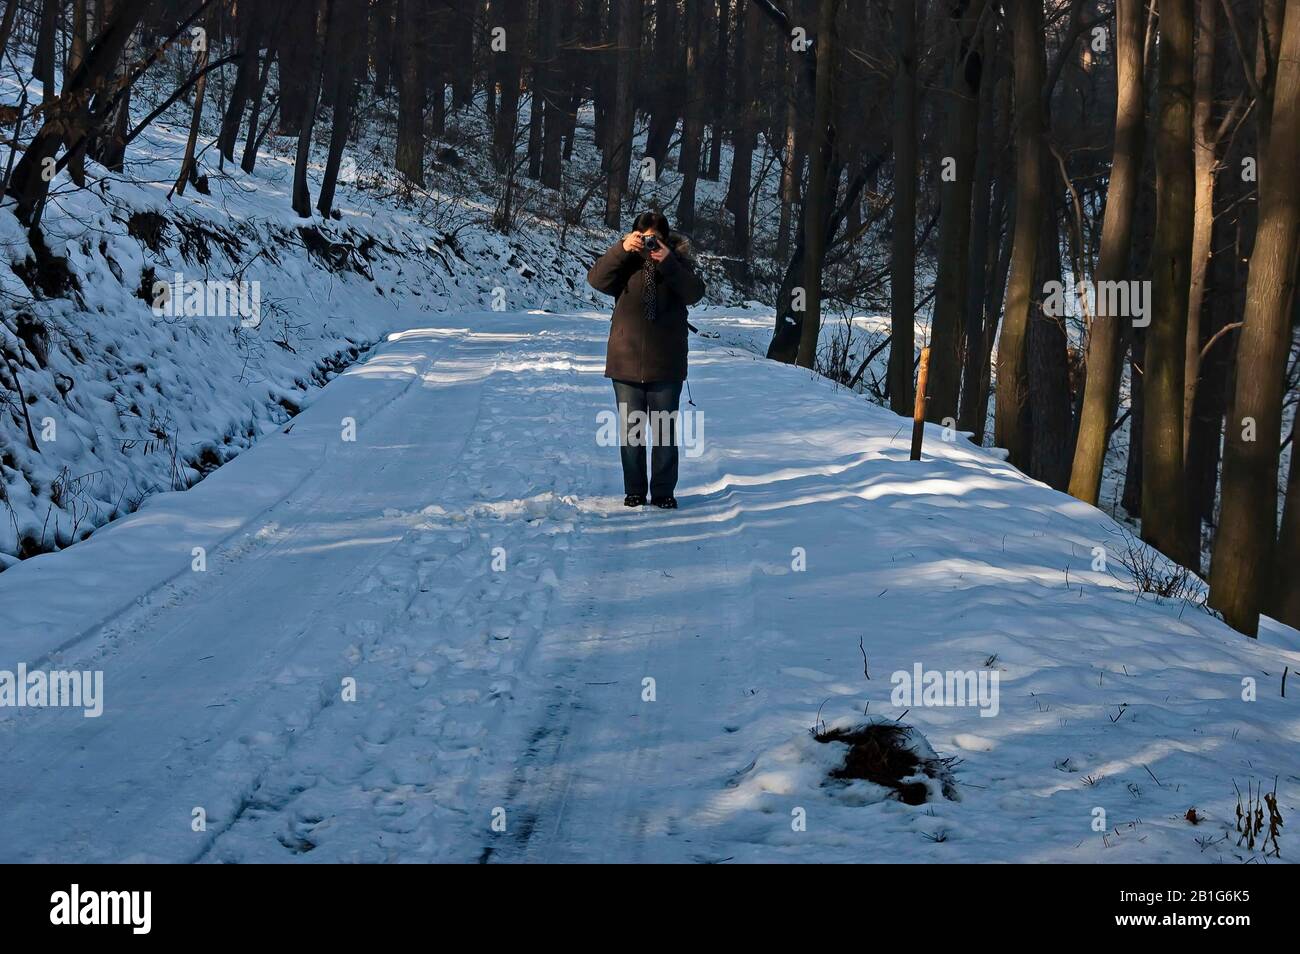 Photographer takes pictures in snowy forest in winter, Vitosha mountain, Bulgaria Stock Photo